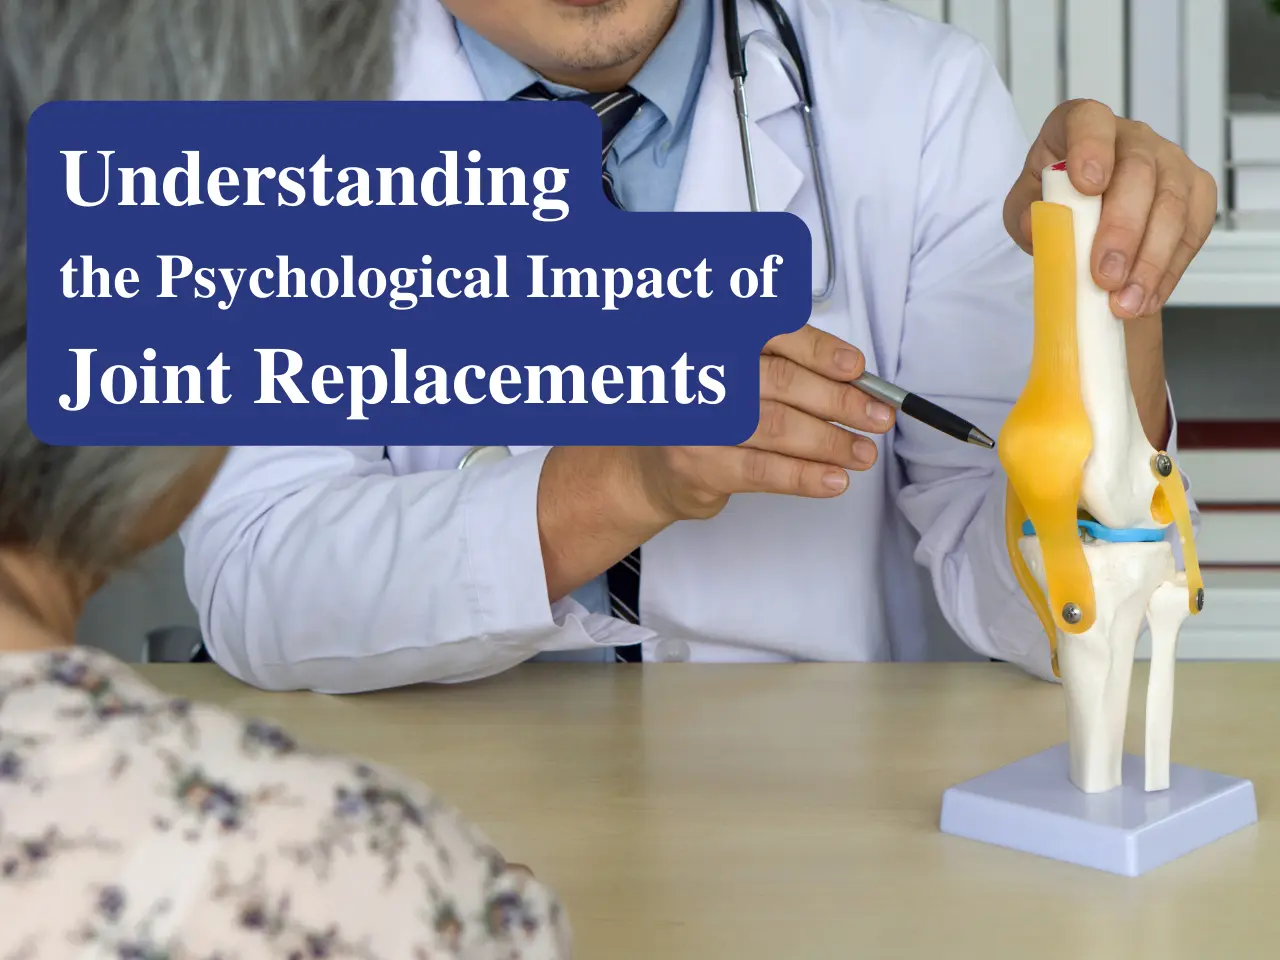 Psychological Impact of Joint Replacements